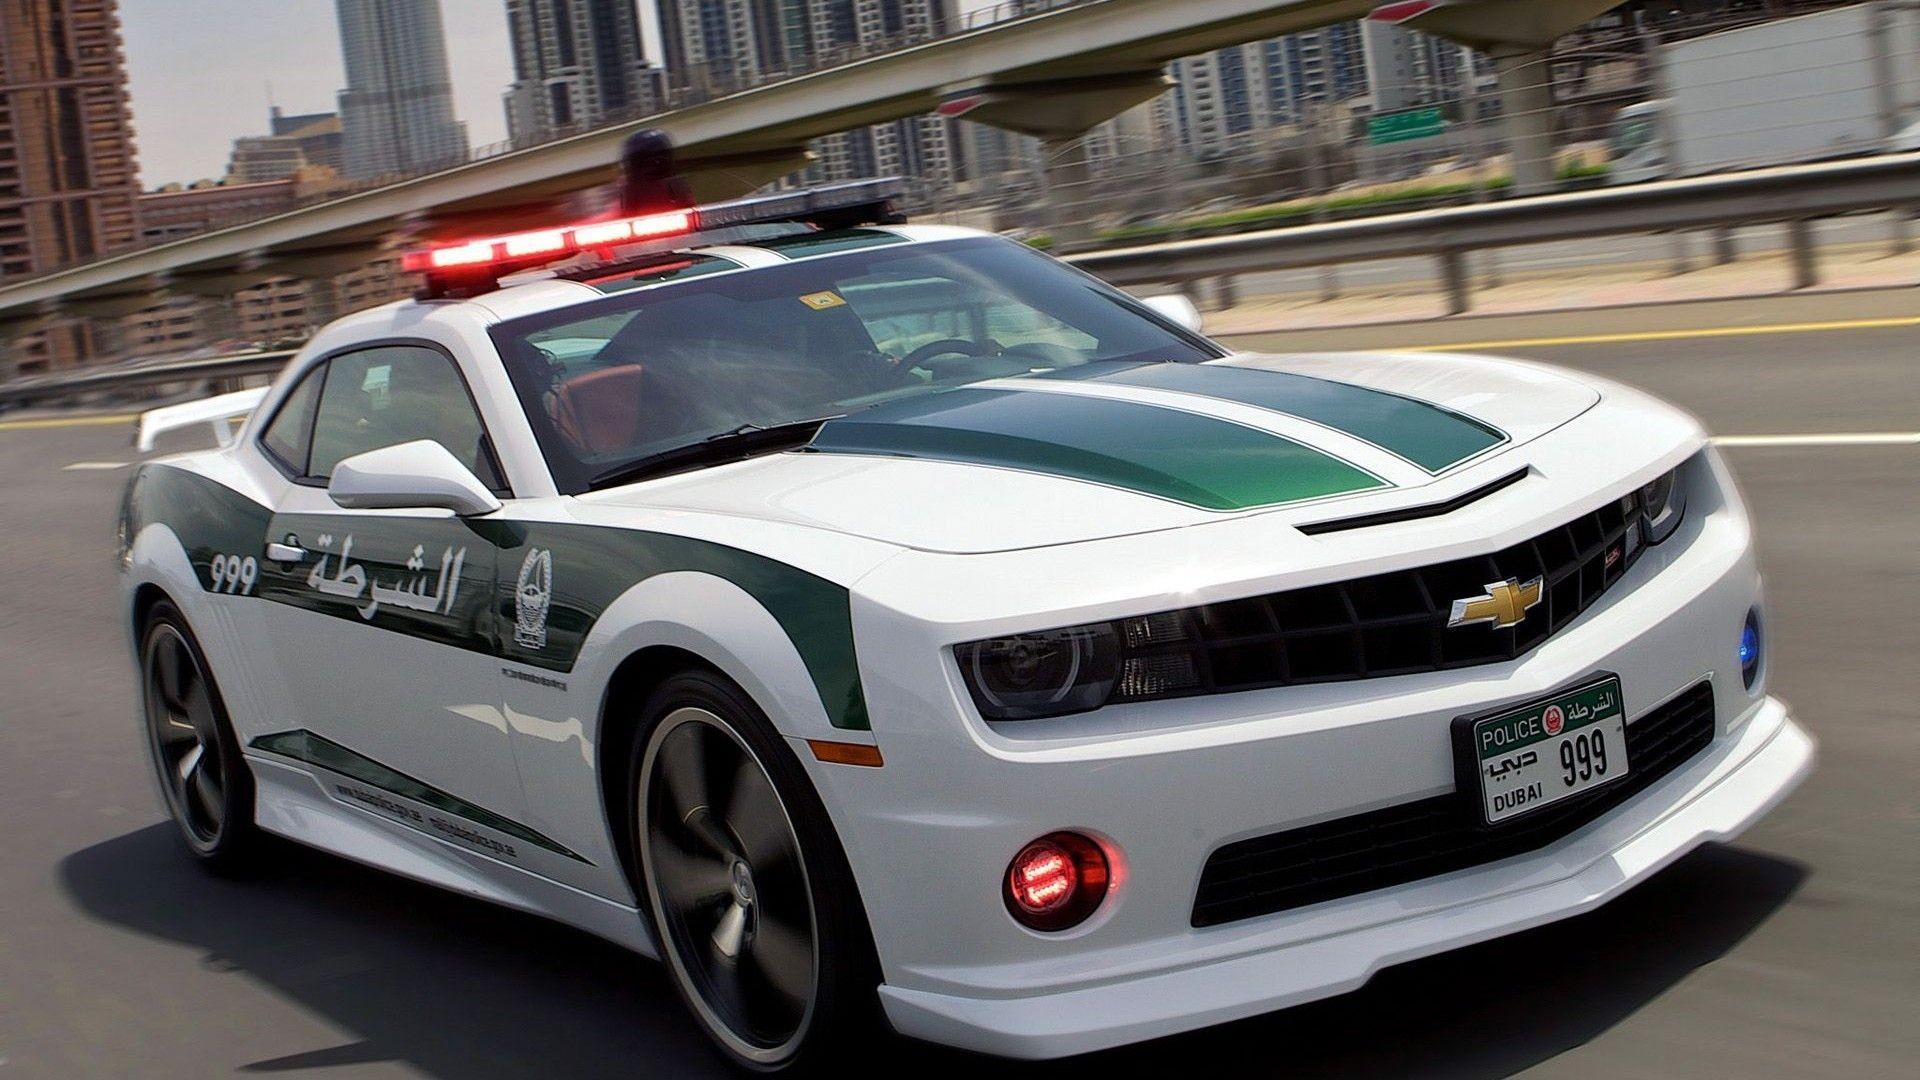 1920x1080 Police Car Wallpapers - Wallpaper Cave